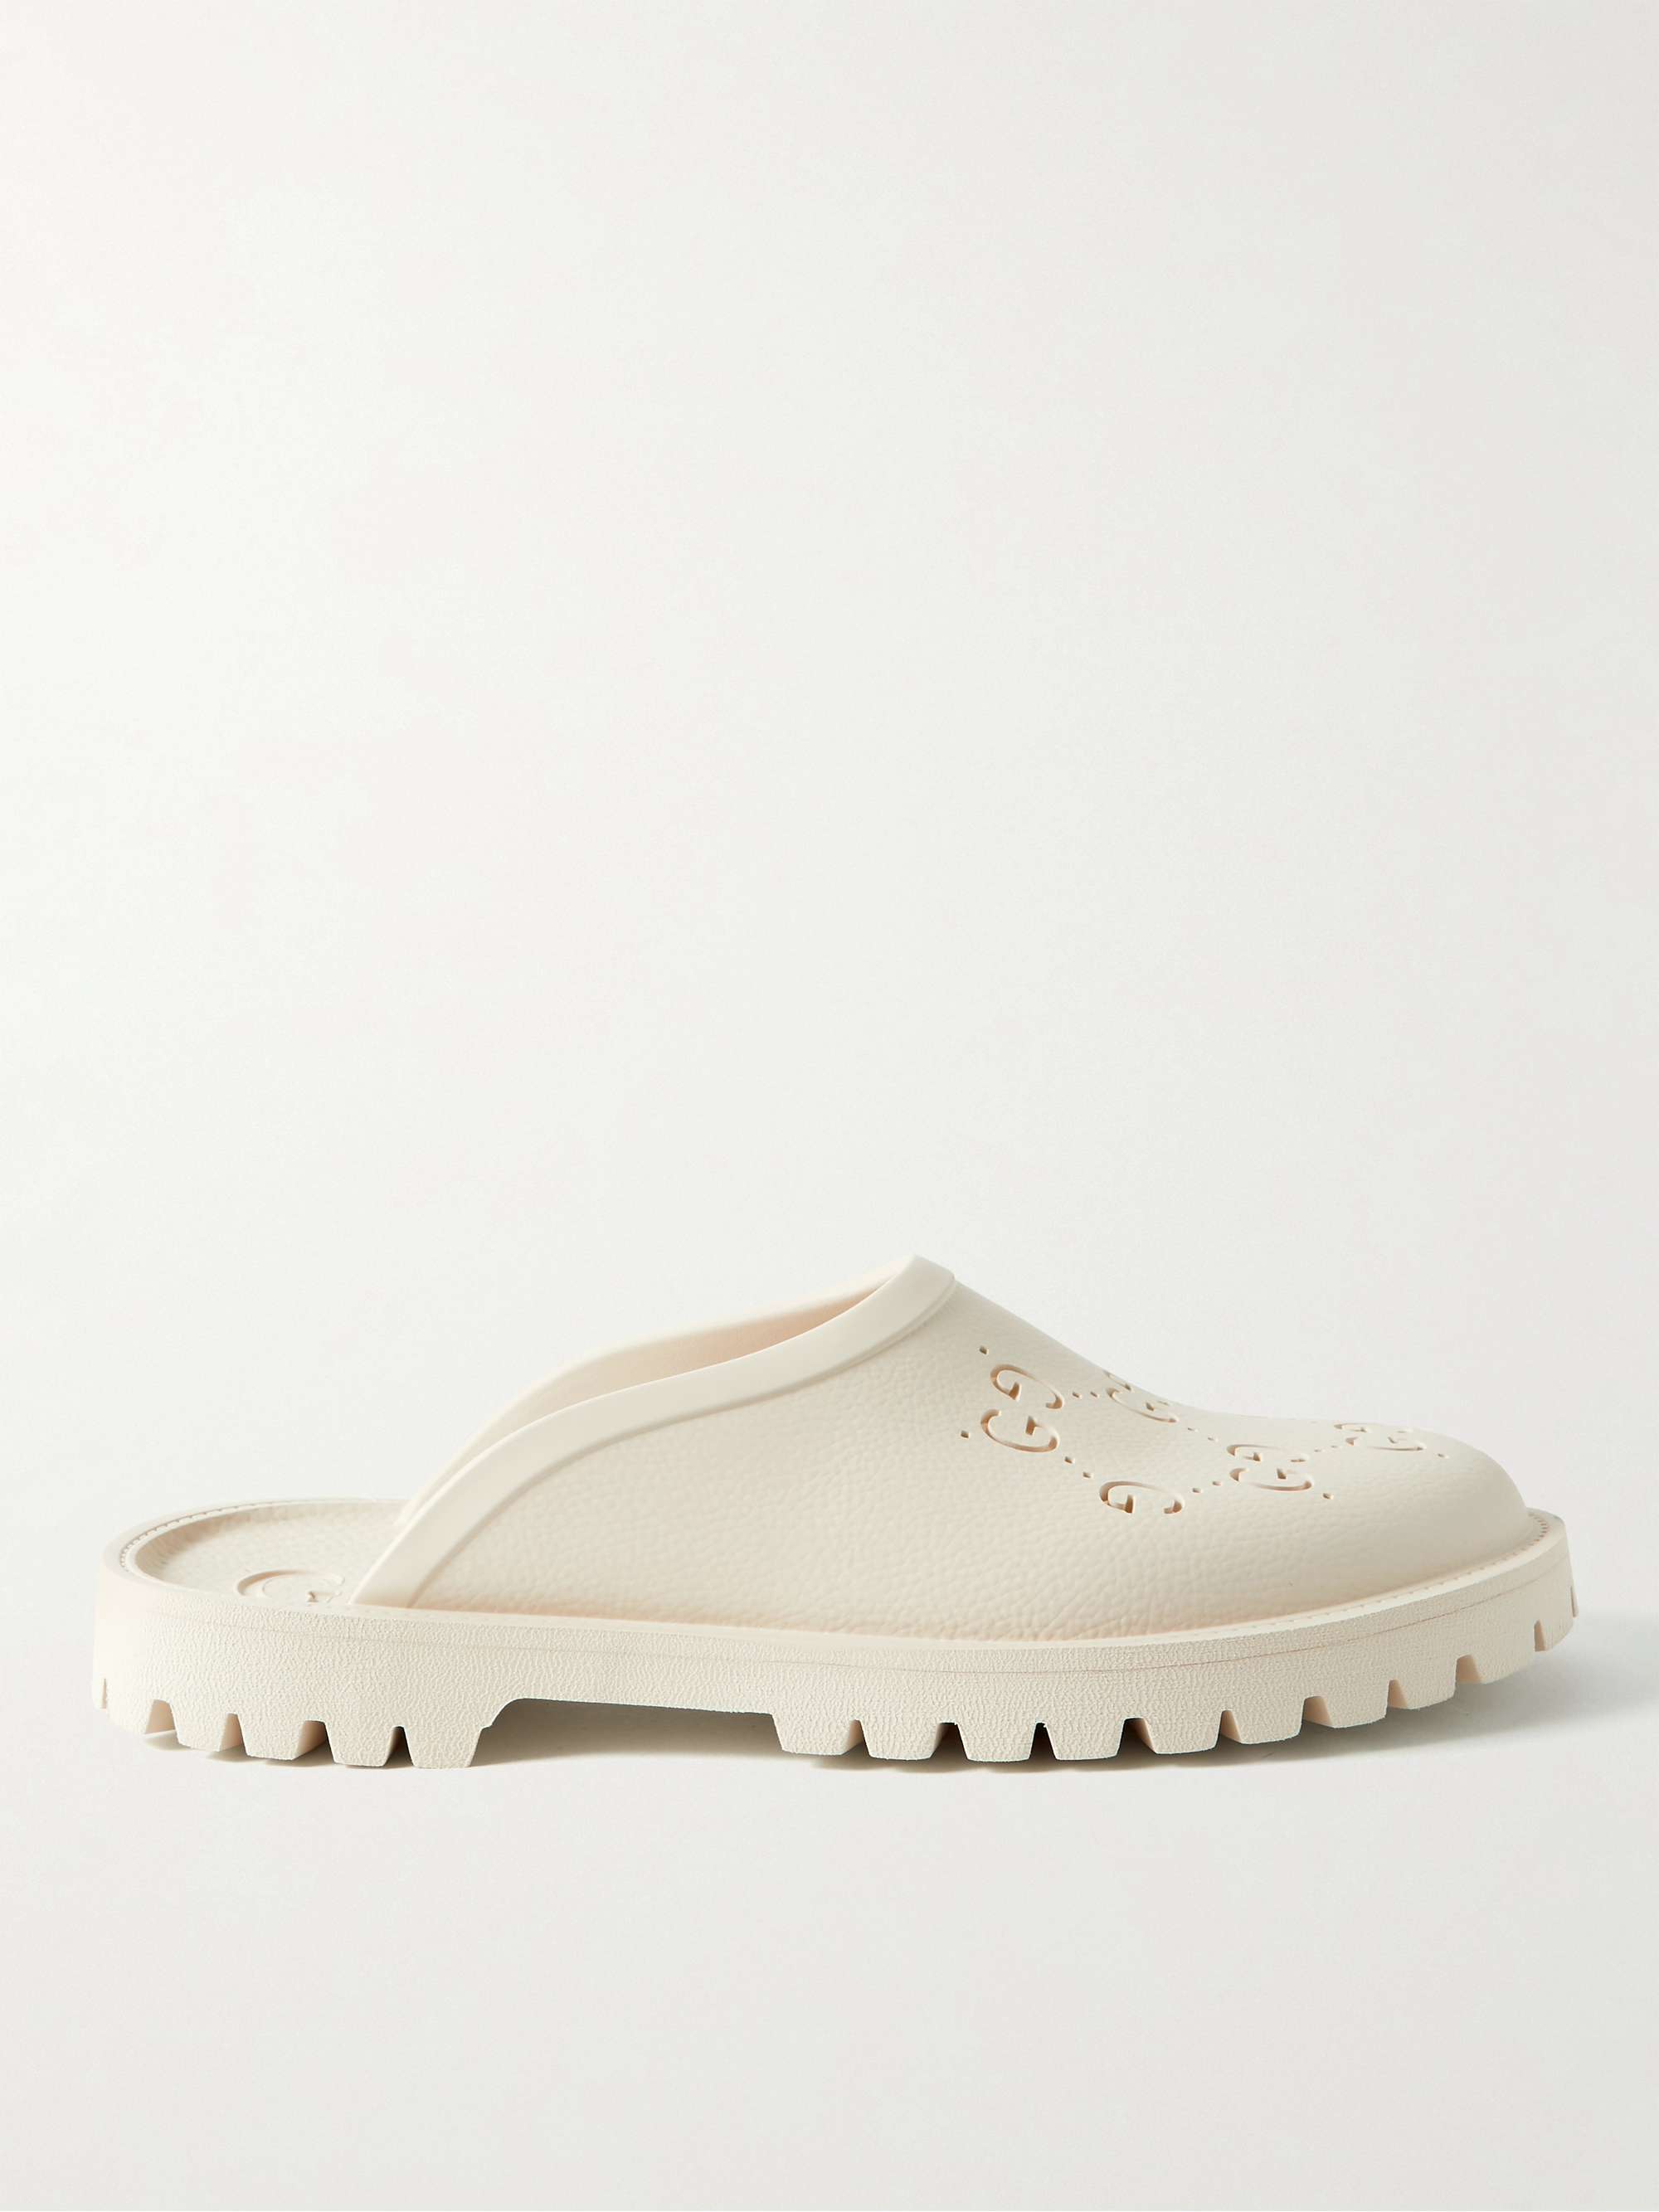 GUCCI Logo-Perforated Rubber Clogs for Men | MR PORTER